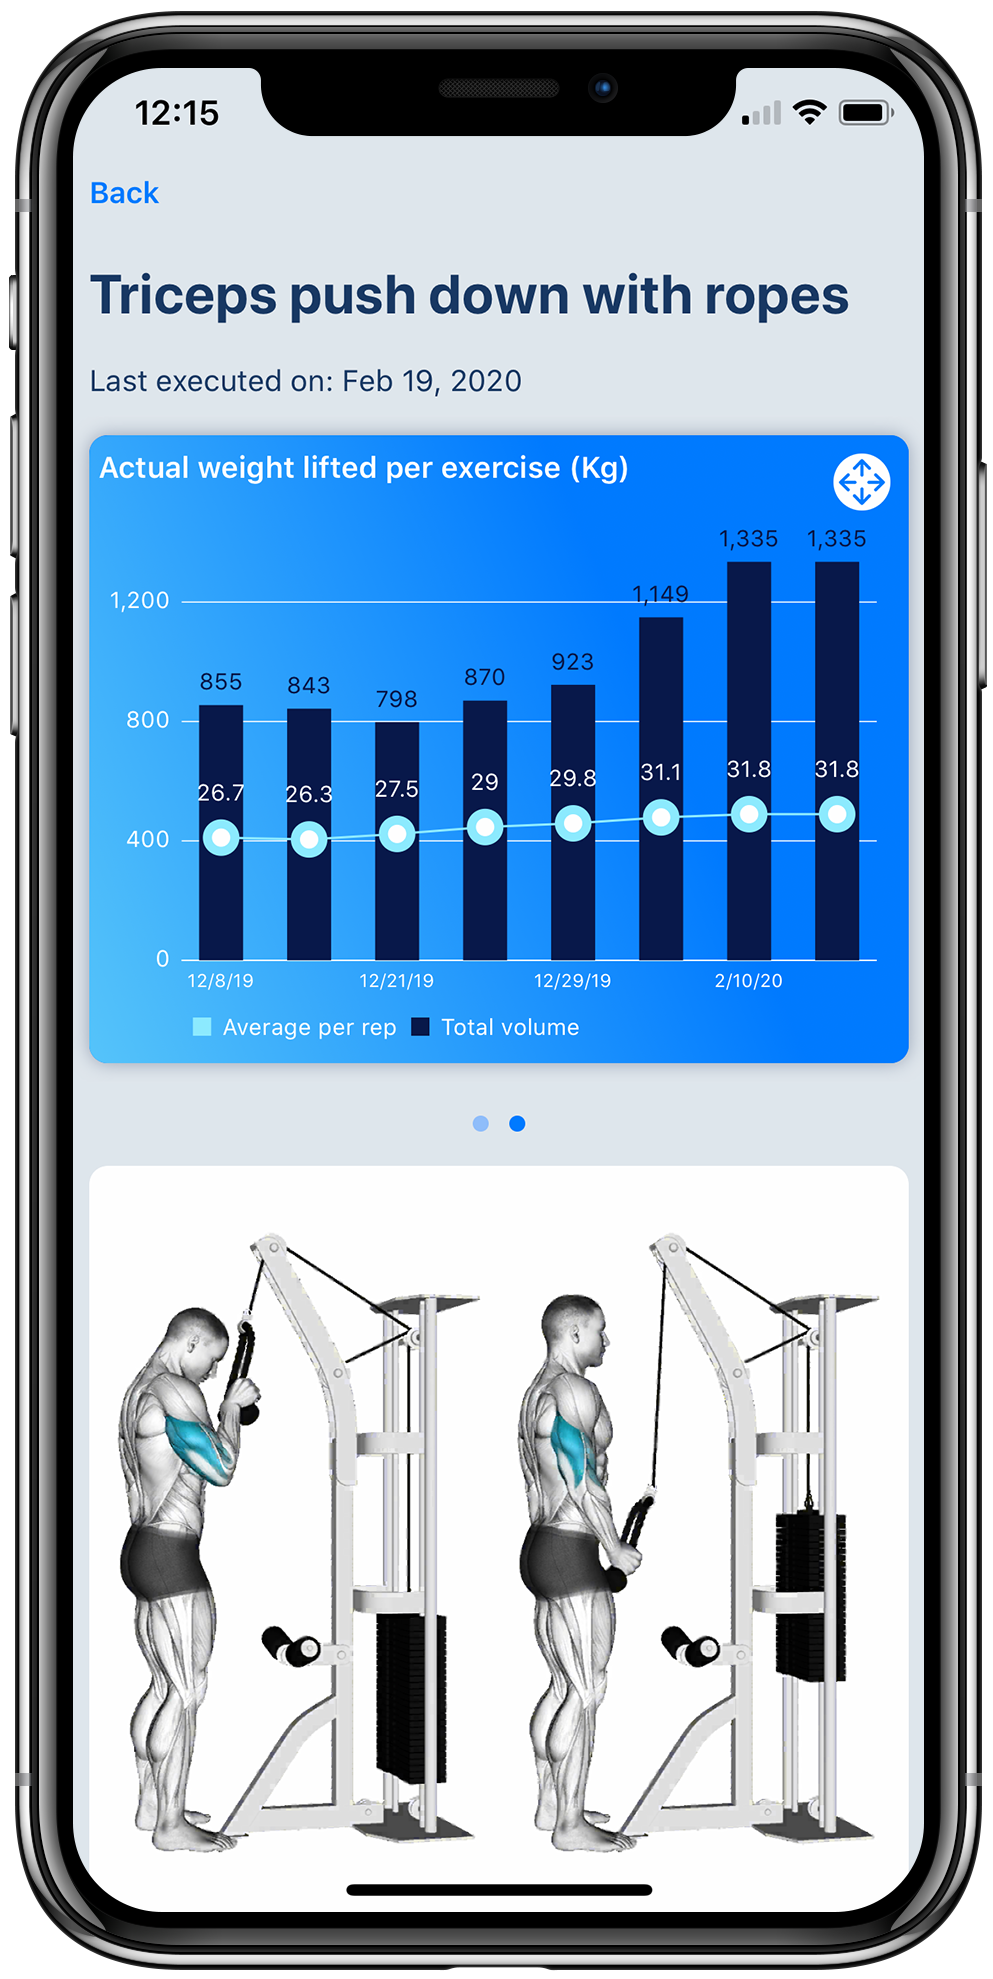 Workout tracker app on iPhone displaying a bench press exercise including progress